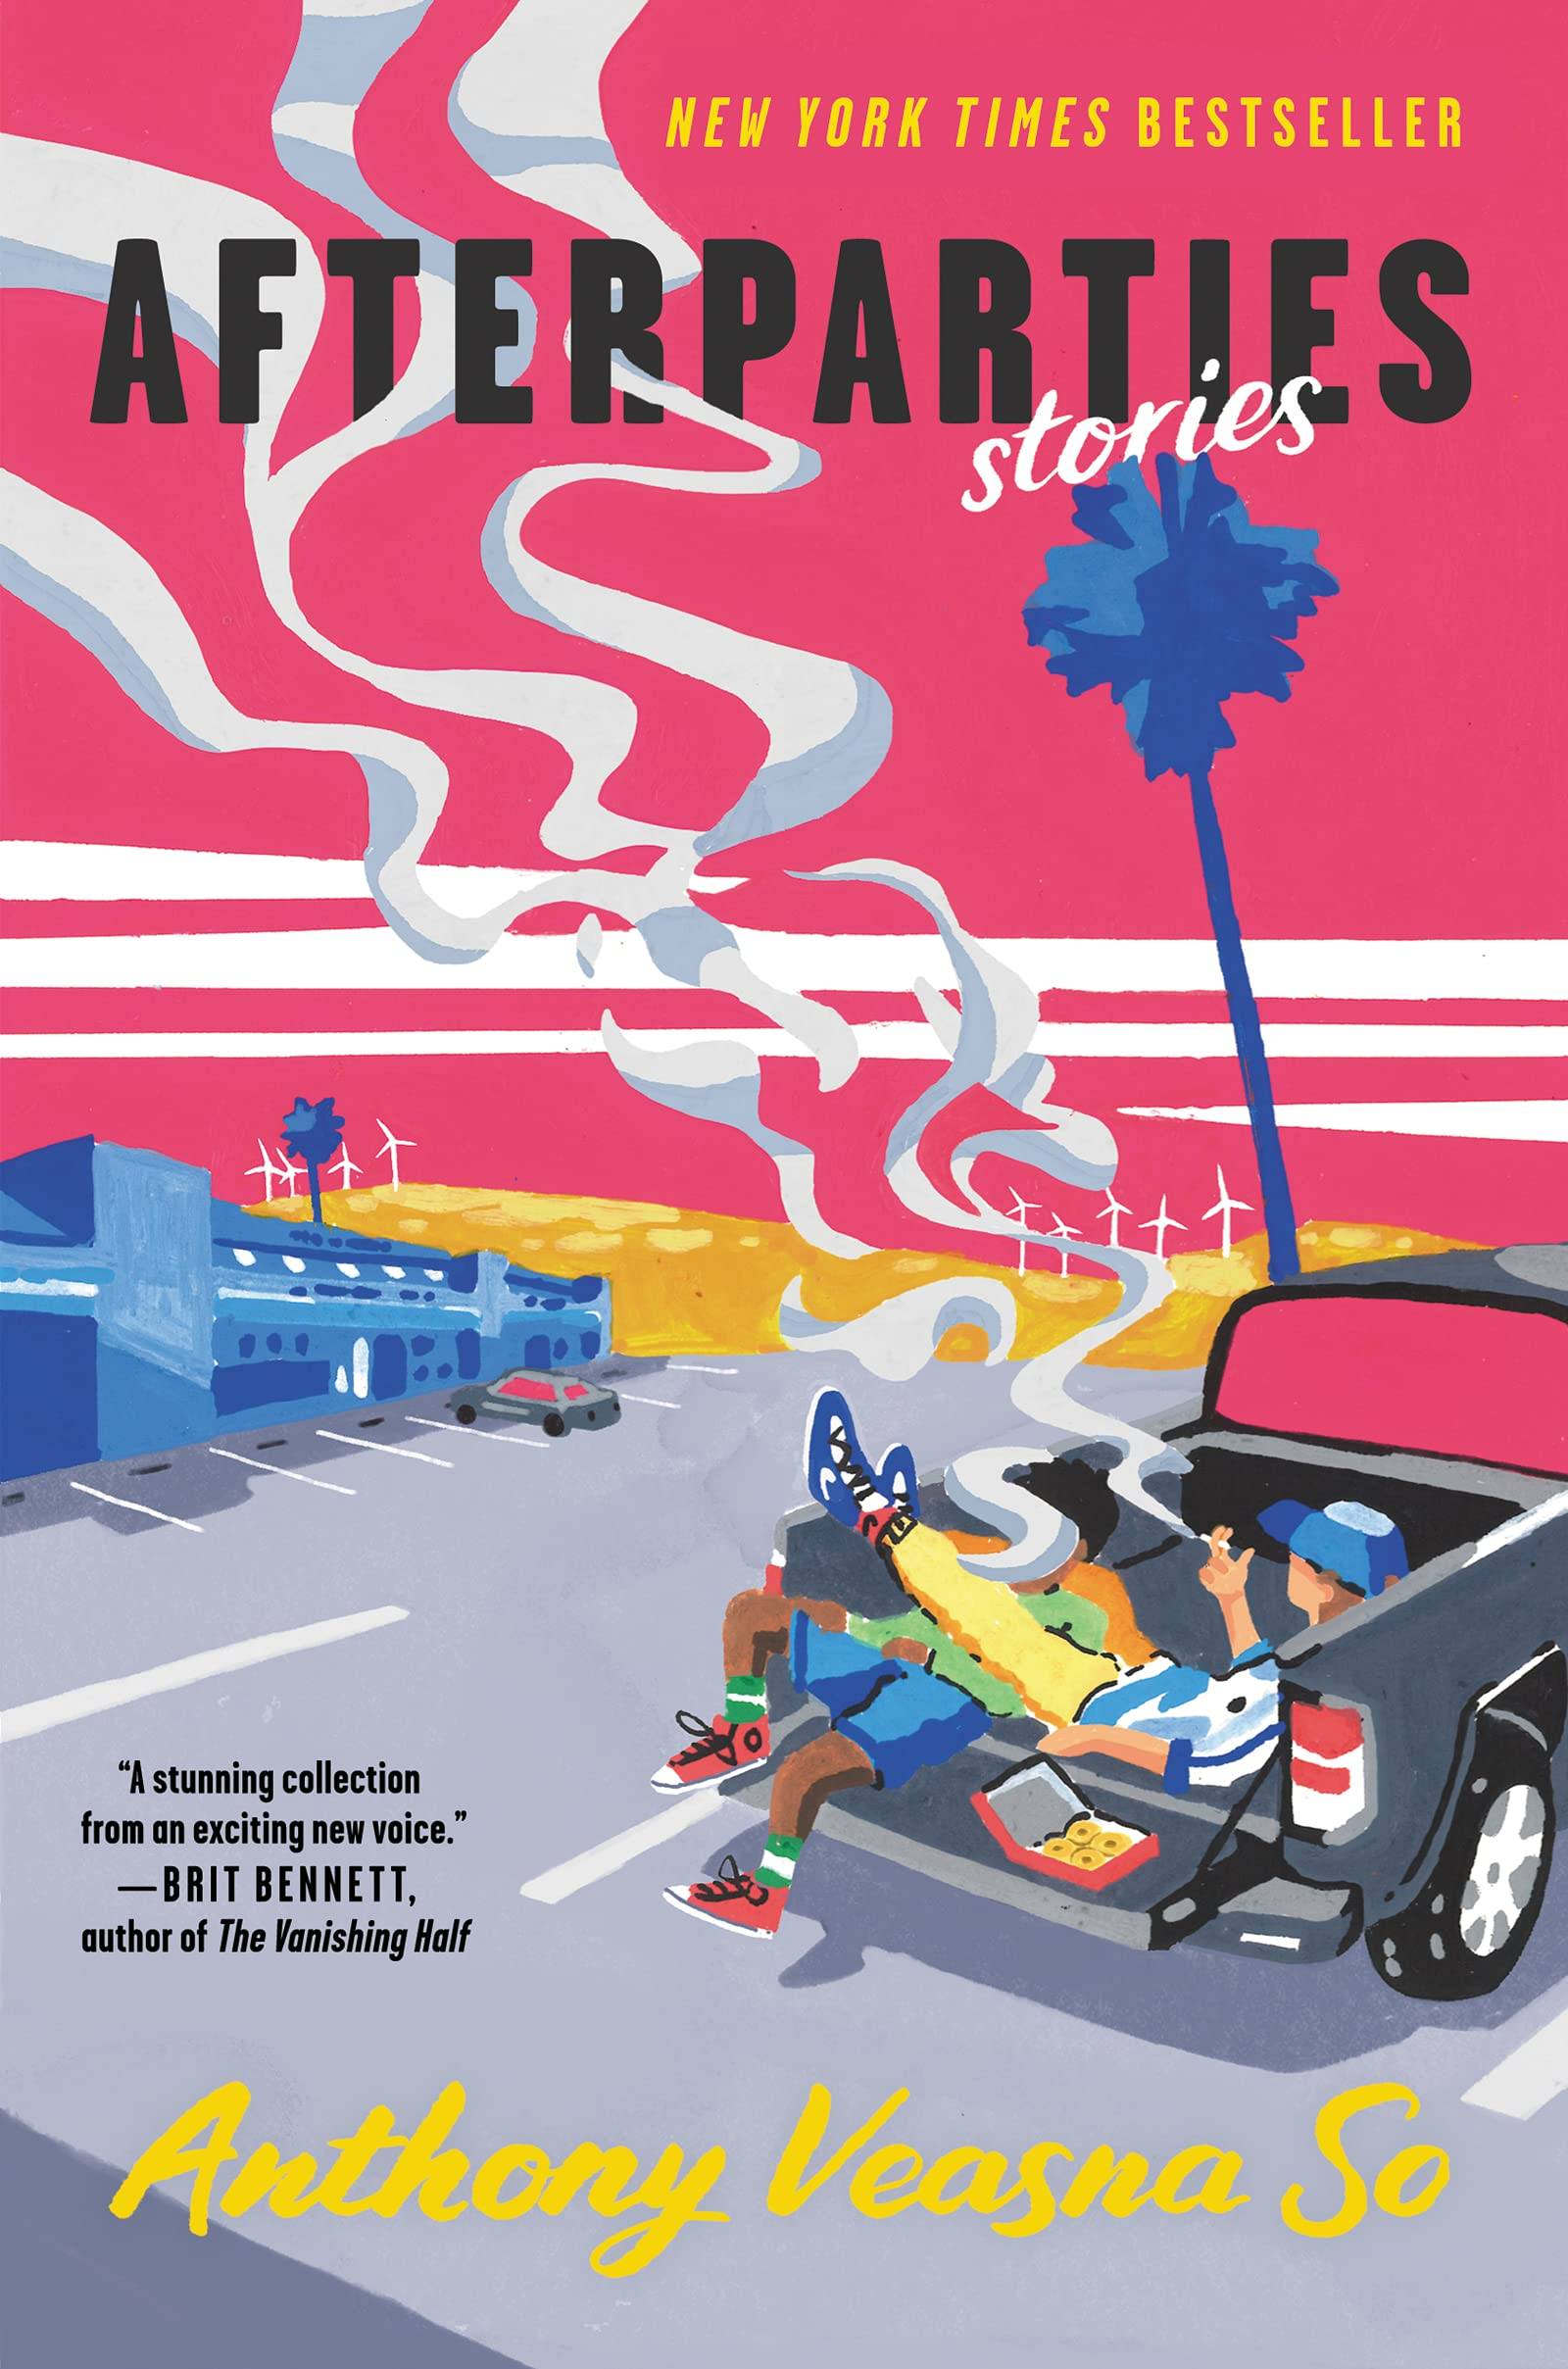 Pink "afterparties" cover featuring an illustration of two people hanging out in the back of a pick up truck smoking with hills, palm trees, and wind turbines in the background.